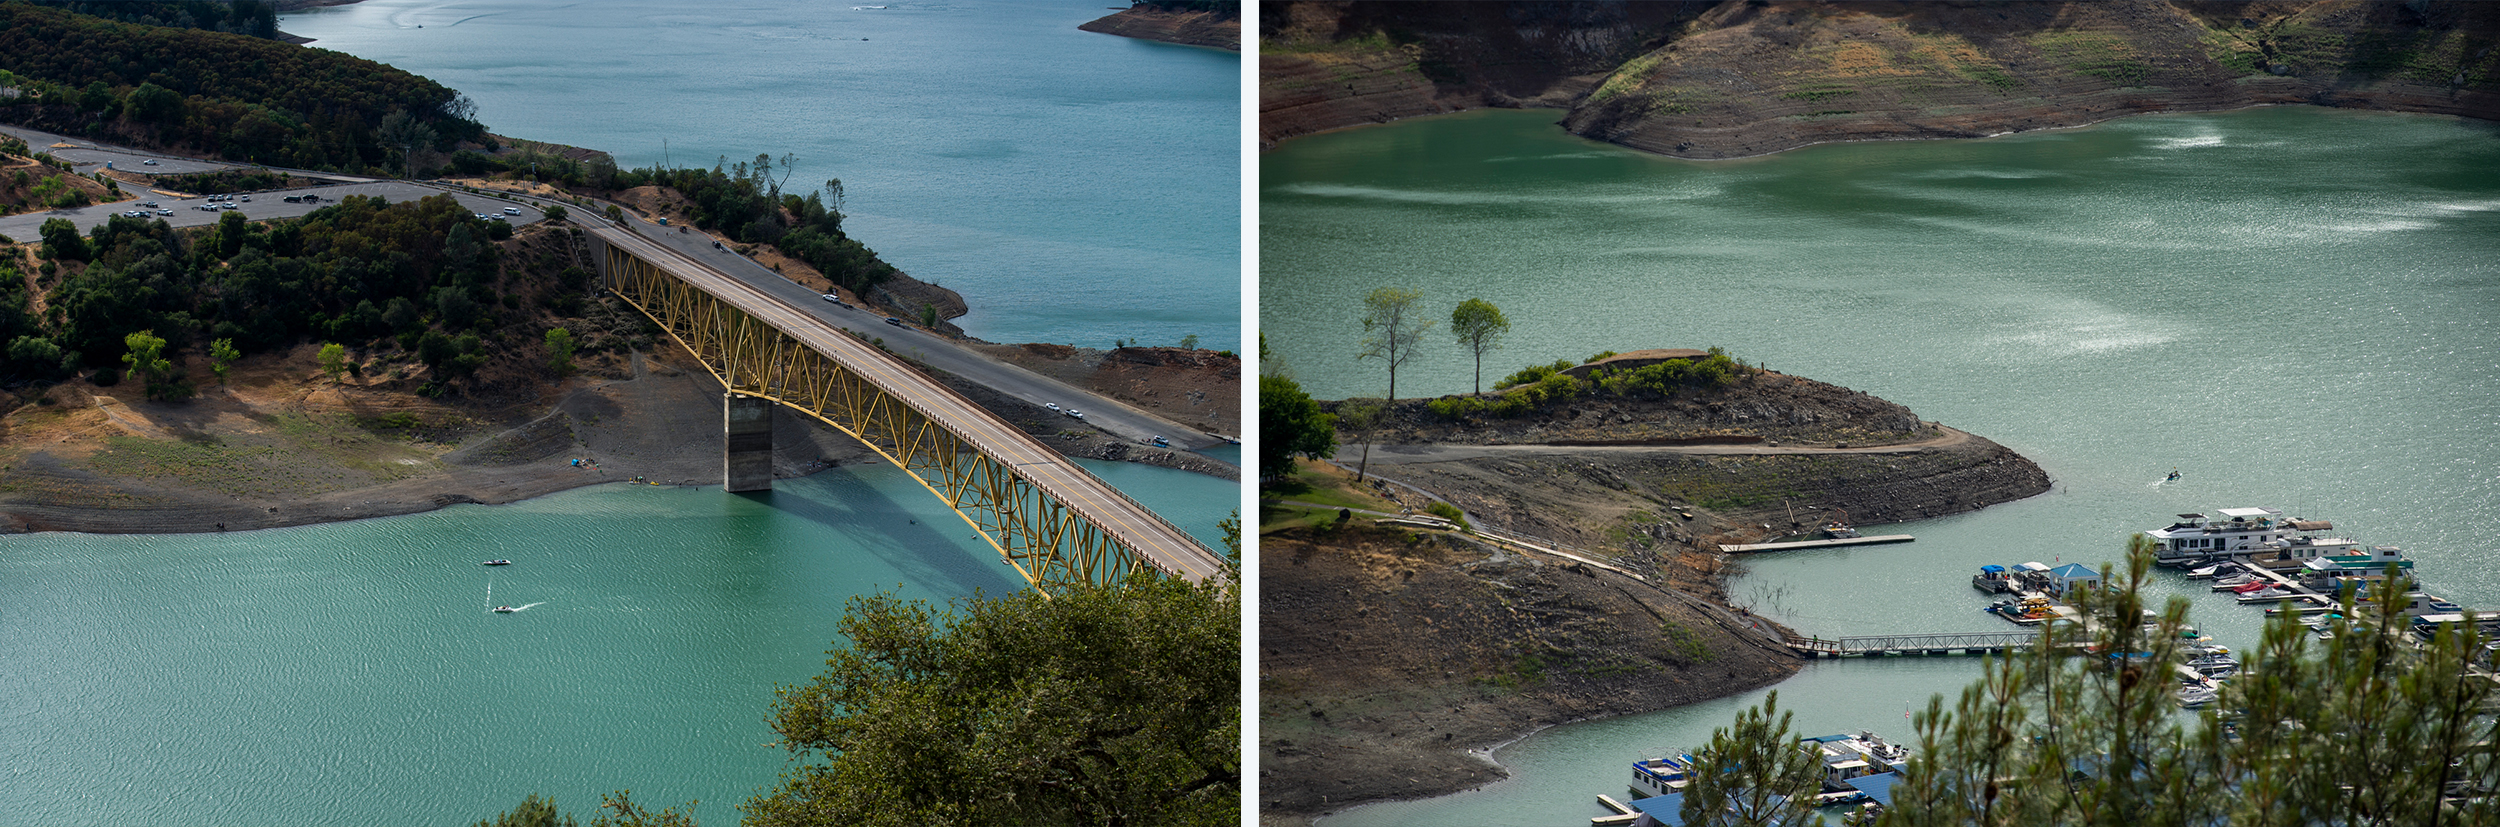 Two photos of the a lake with low water levels. On the left, a bridge crosses a span where the banks of the lake are so low that the lake bed has been exposed. On the right, the same is the case but boats are also seen in dock.